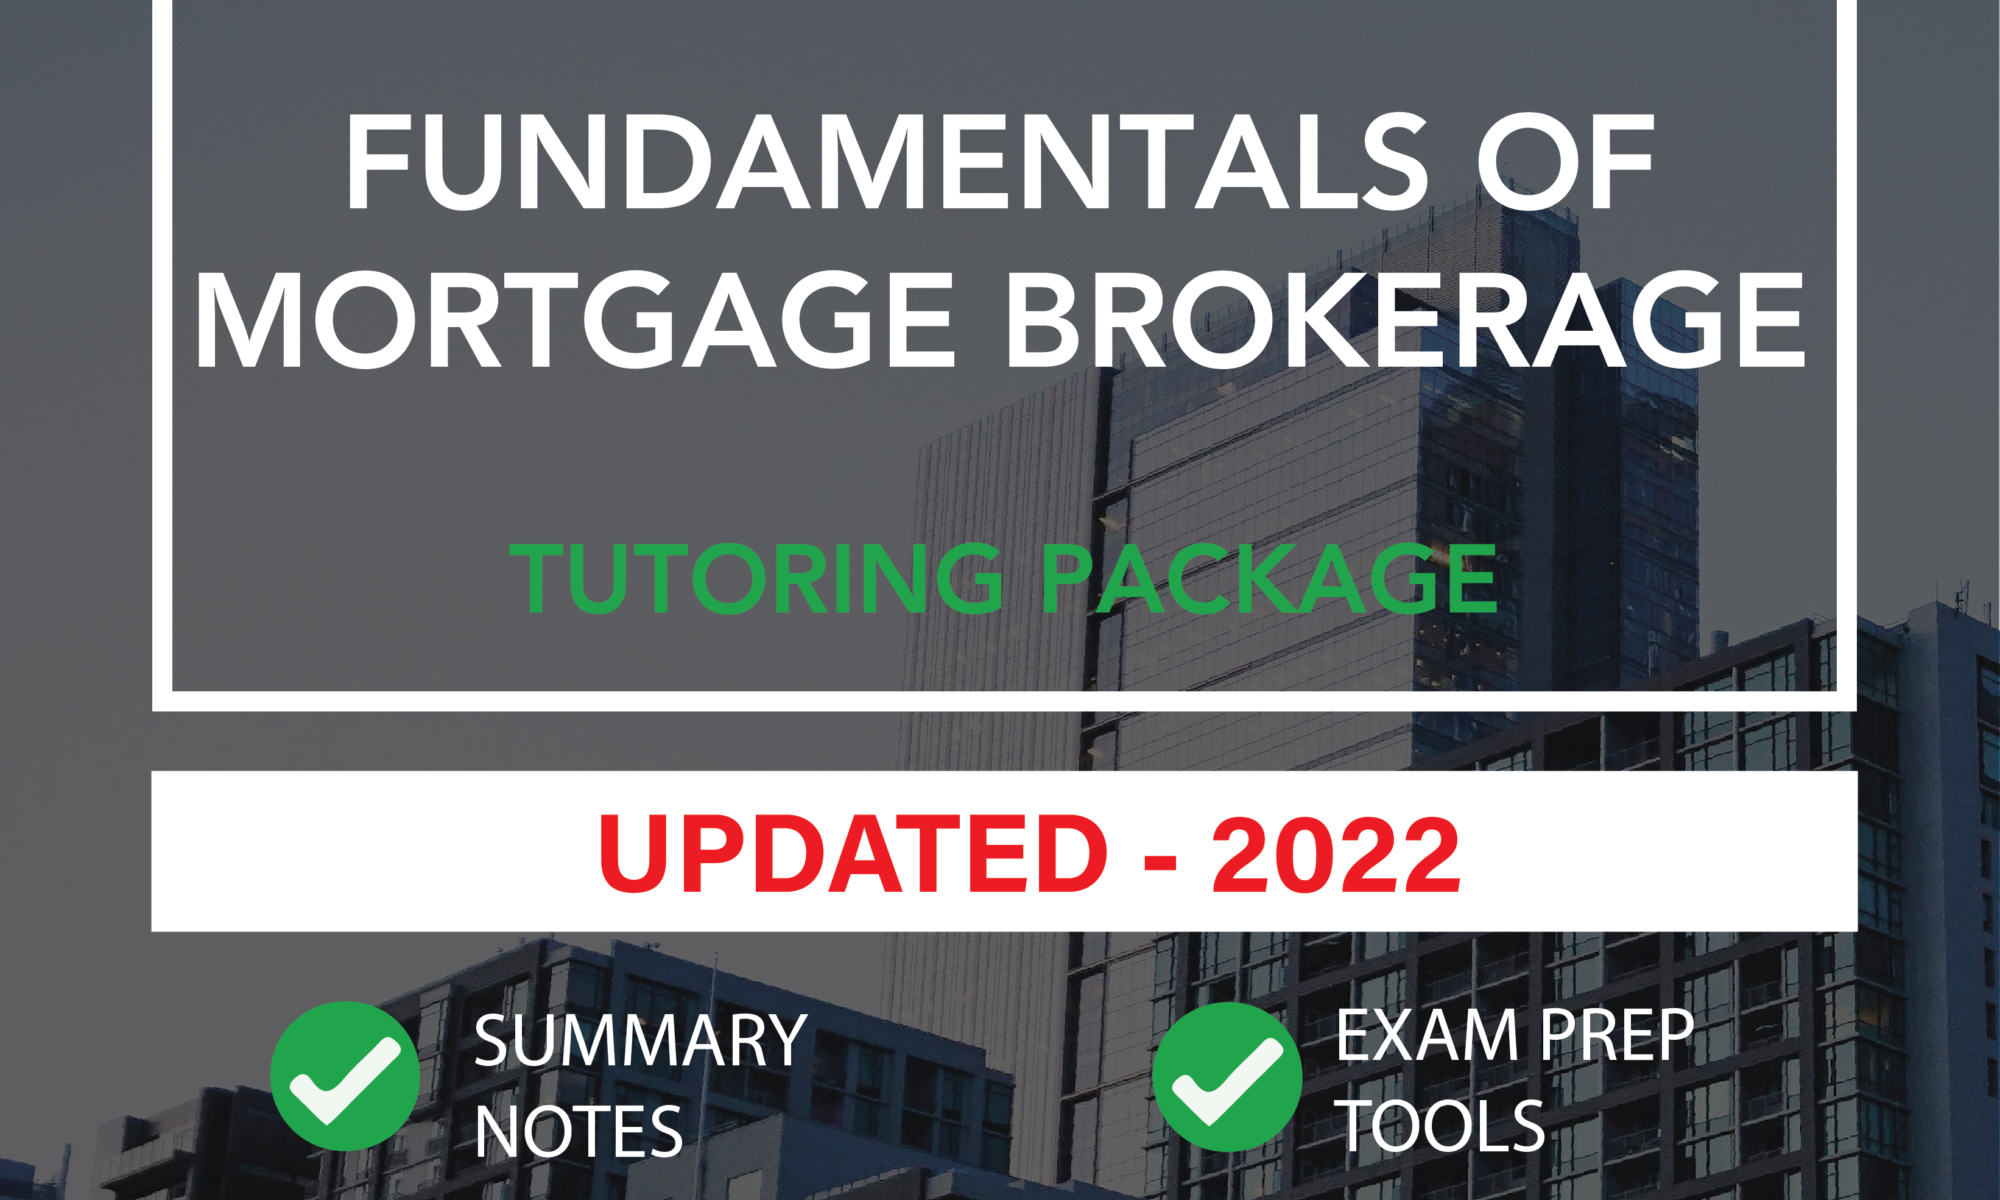 The image shows the title "Fundamentals of Mortgage Brokerage - Tutoring Package" that refers to a product that offers tutoring package details for the Fundamentals of Mortgage Brokerage Licensing Course in Alberta by Alberta Real Estate School.